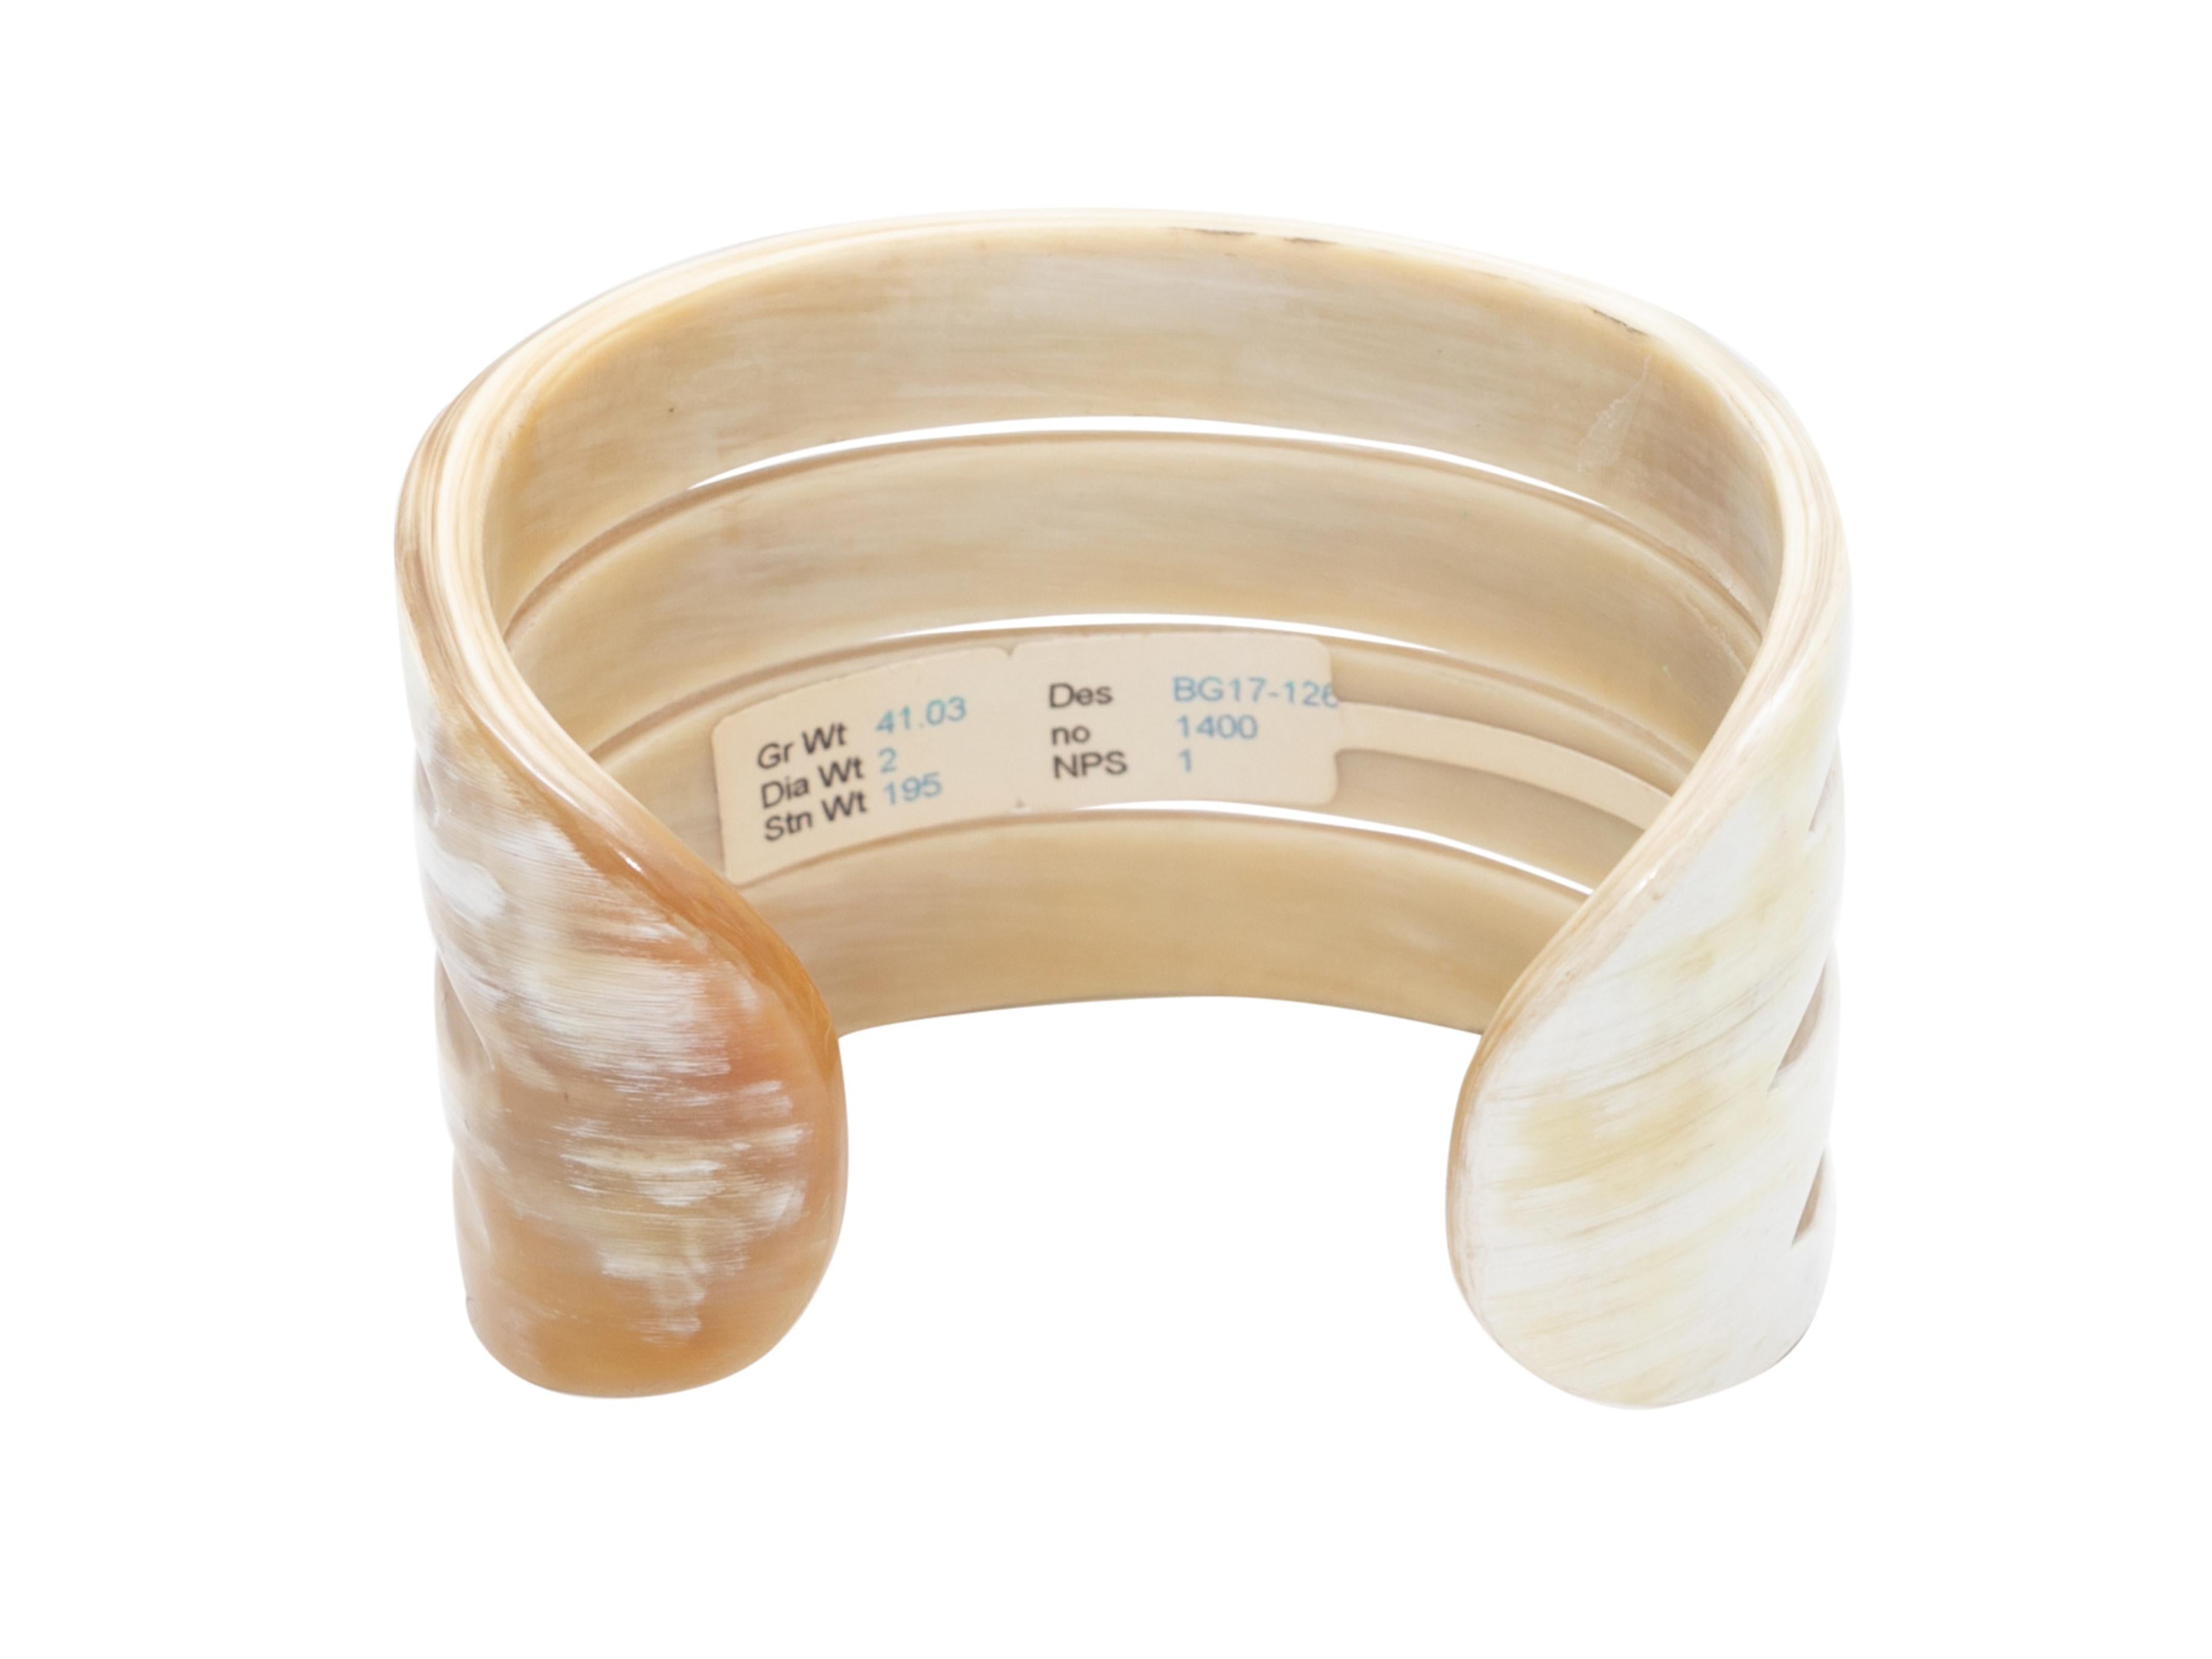 Beige & White Arthur Mader Sliced Diamond & Horn Cuff Bracelet In Good Condition For Sale In New York, NY